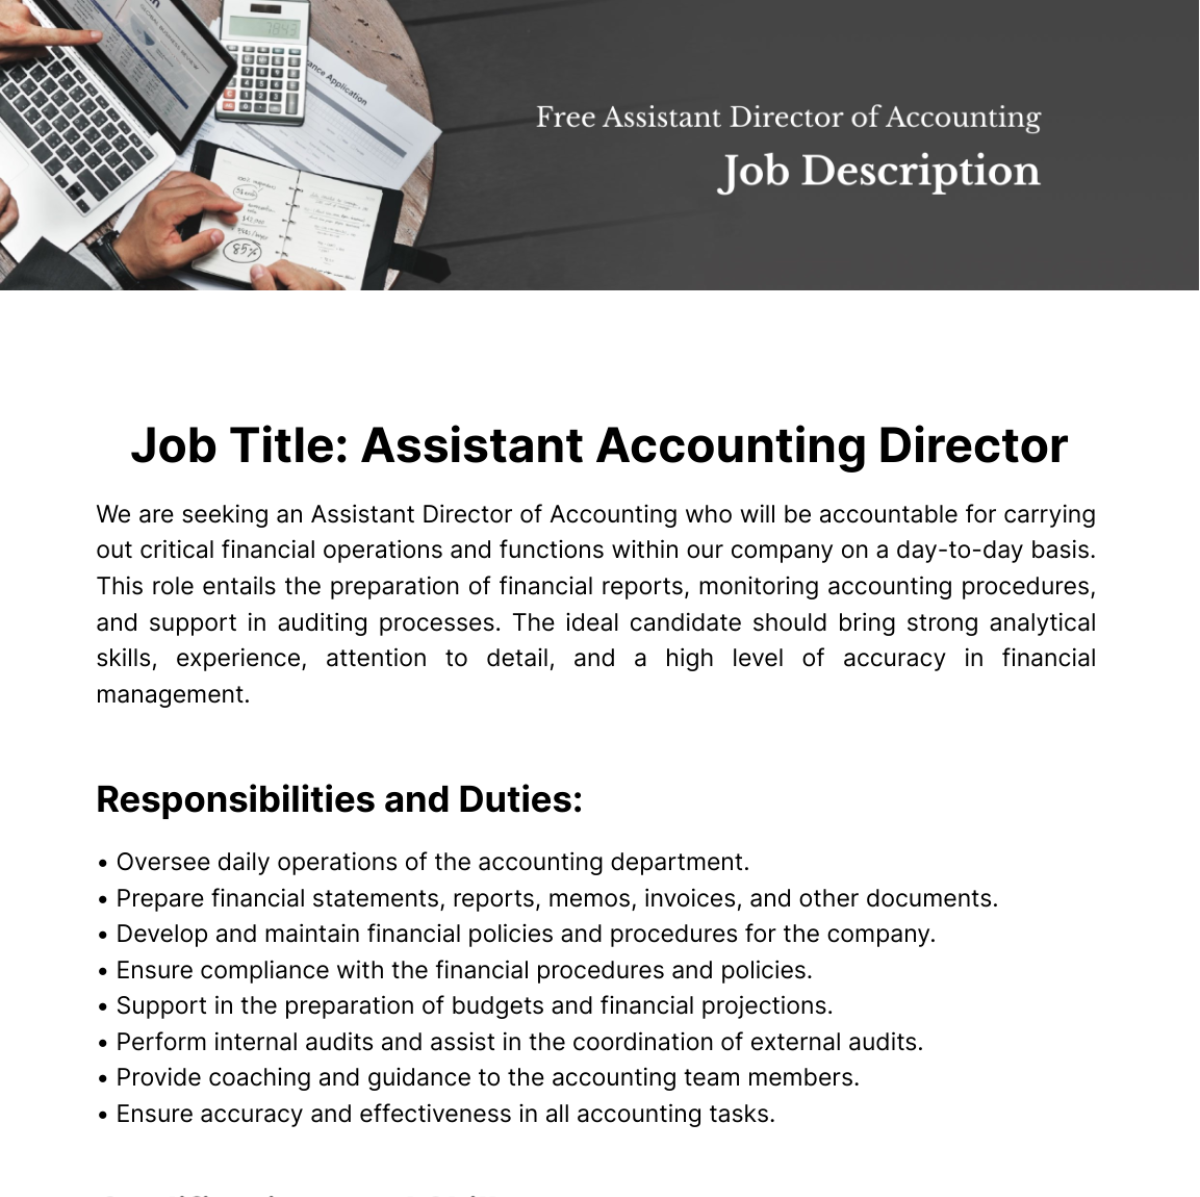 Assistant Director of Accounting Job Description Template